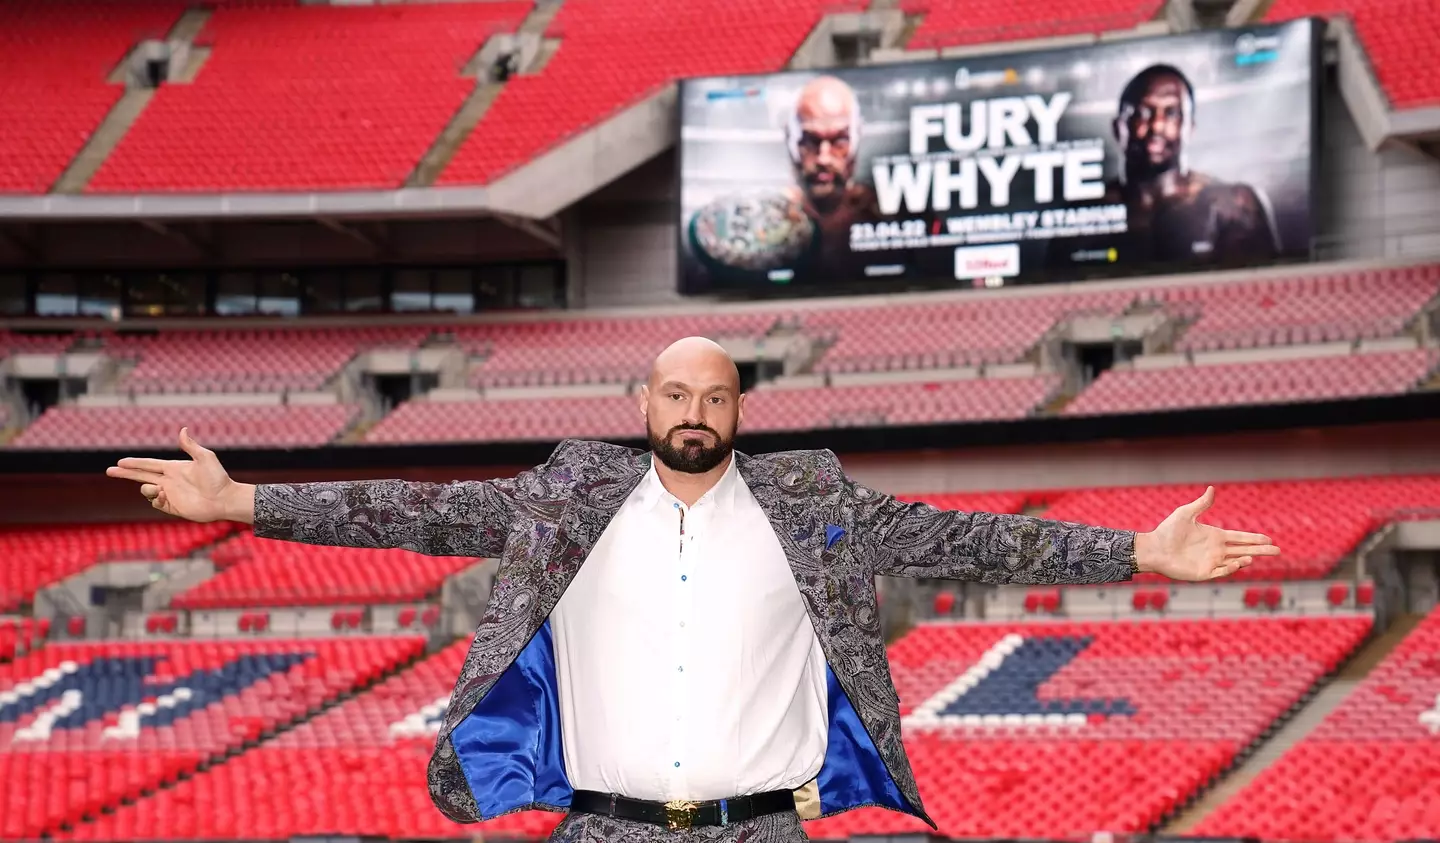 Fury will headline at Wembley for the first time against Whyre. Image: PA Images